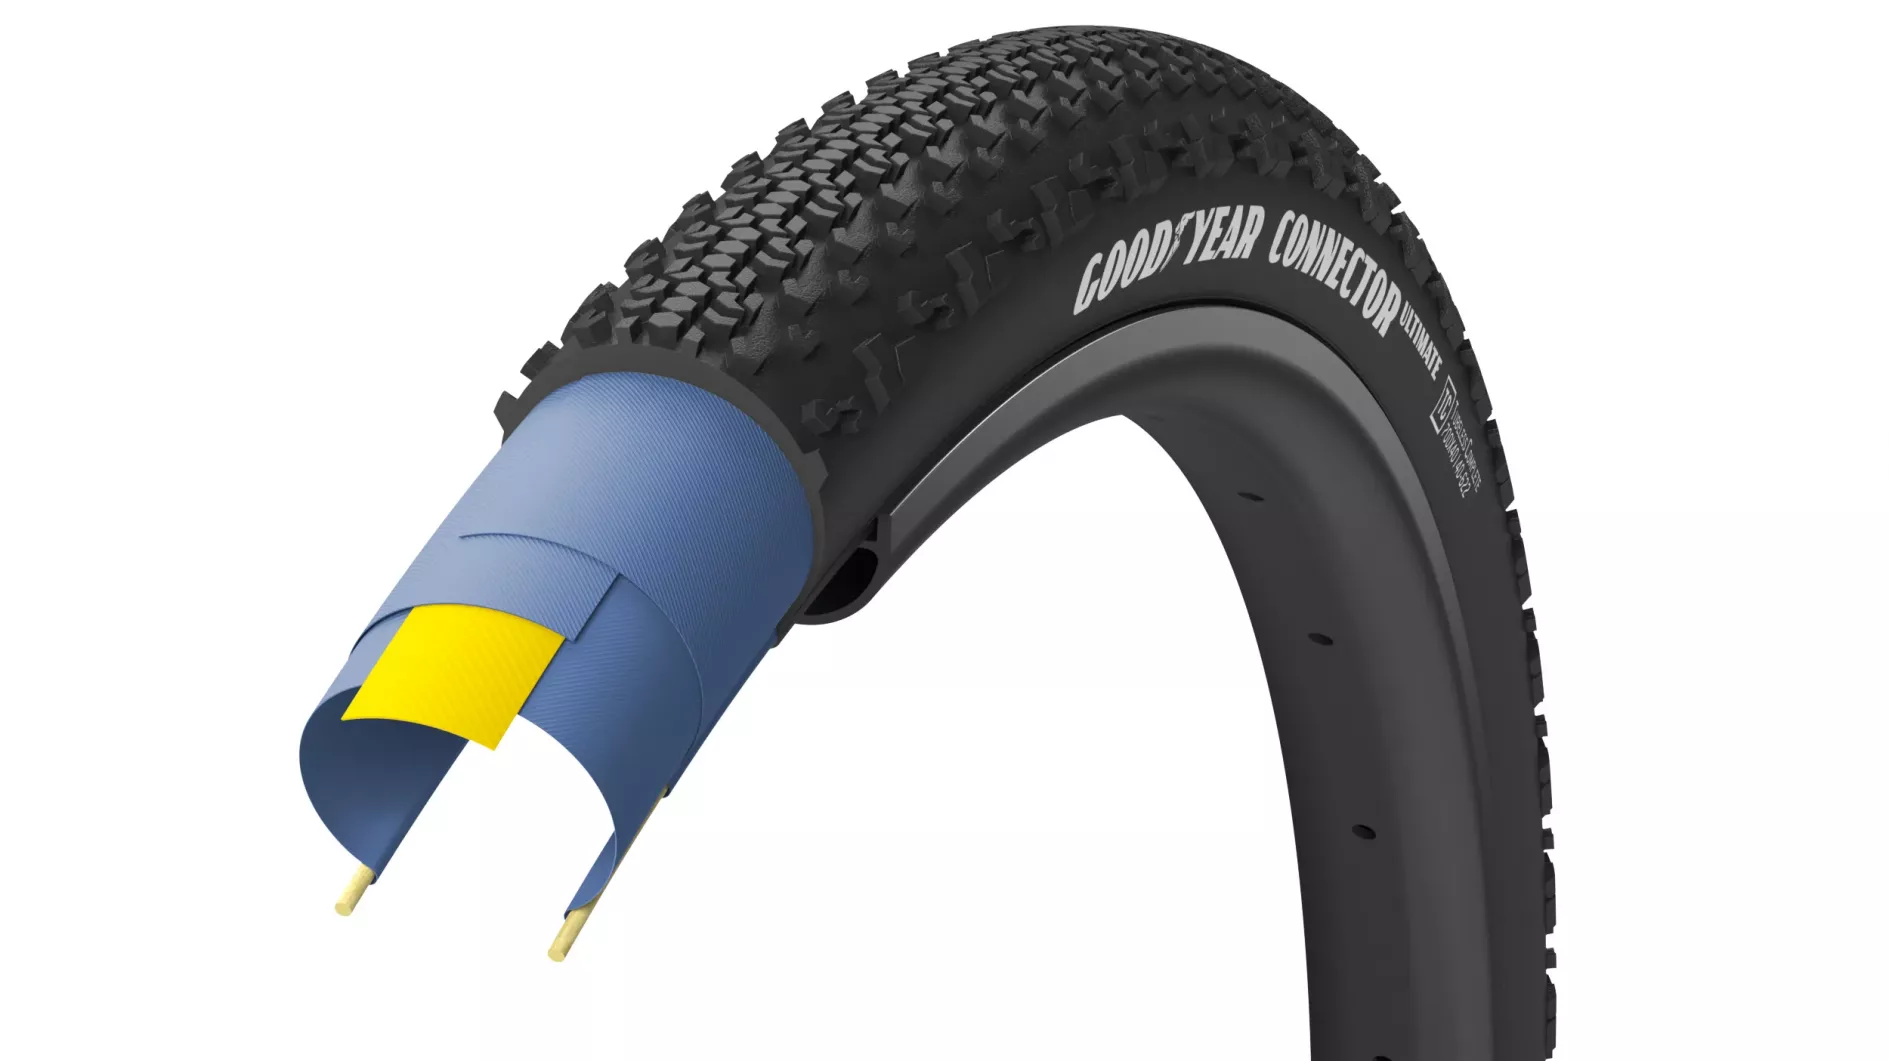 Фотографія Покришка GoodYear CONNECTOR tubeless complete, 700x35 (35-622) folding, 120tpi, Чорна